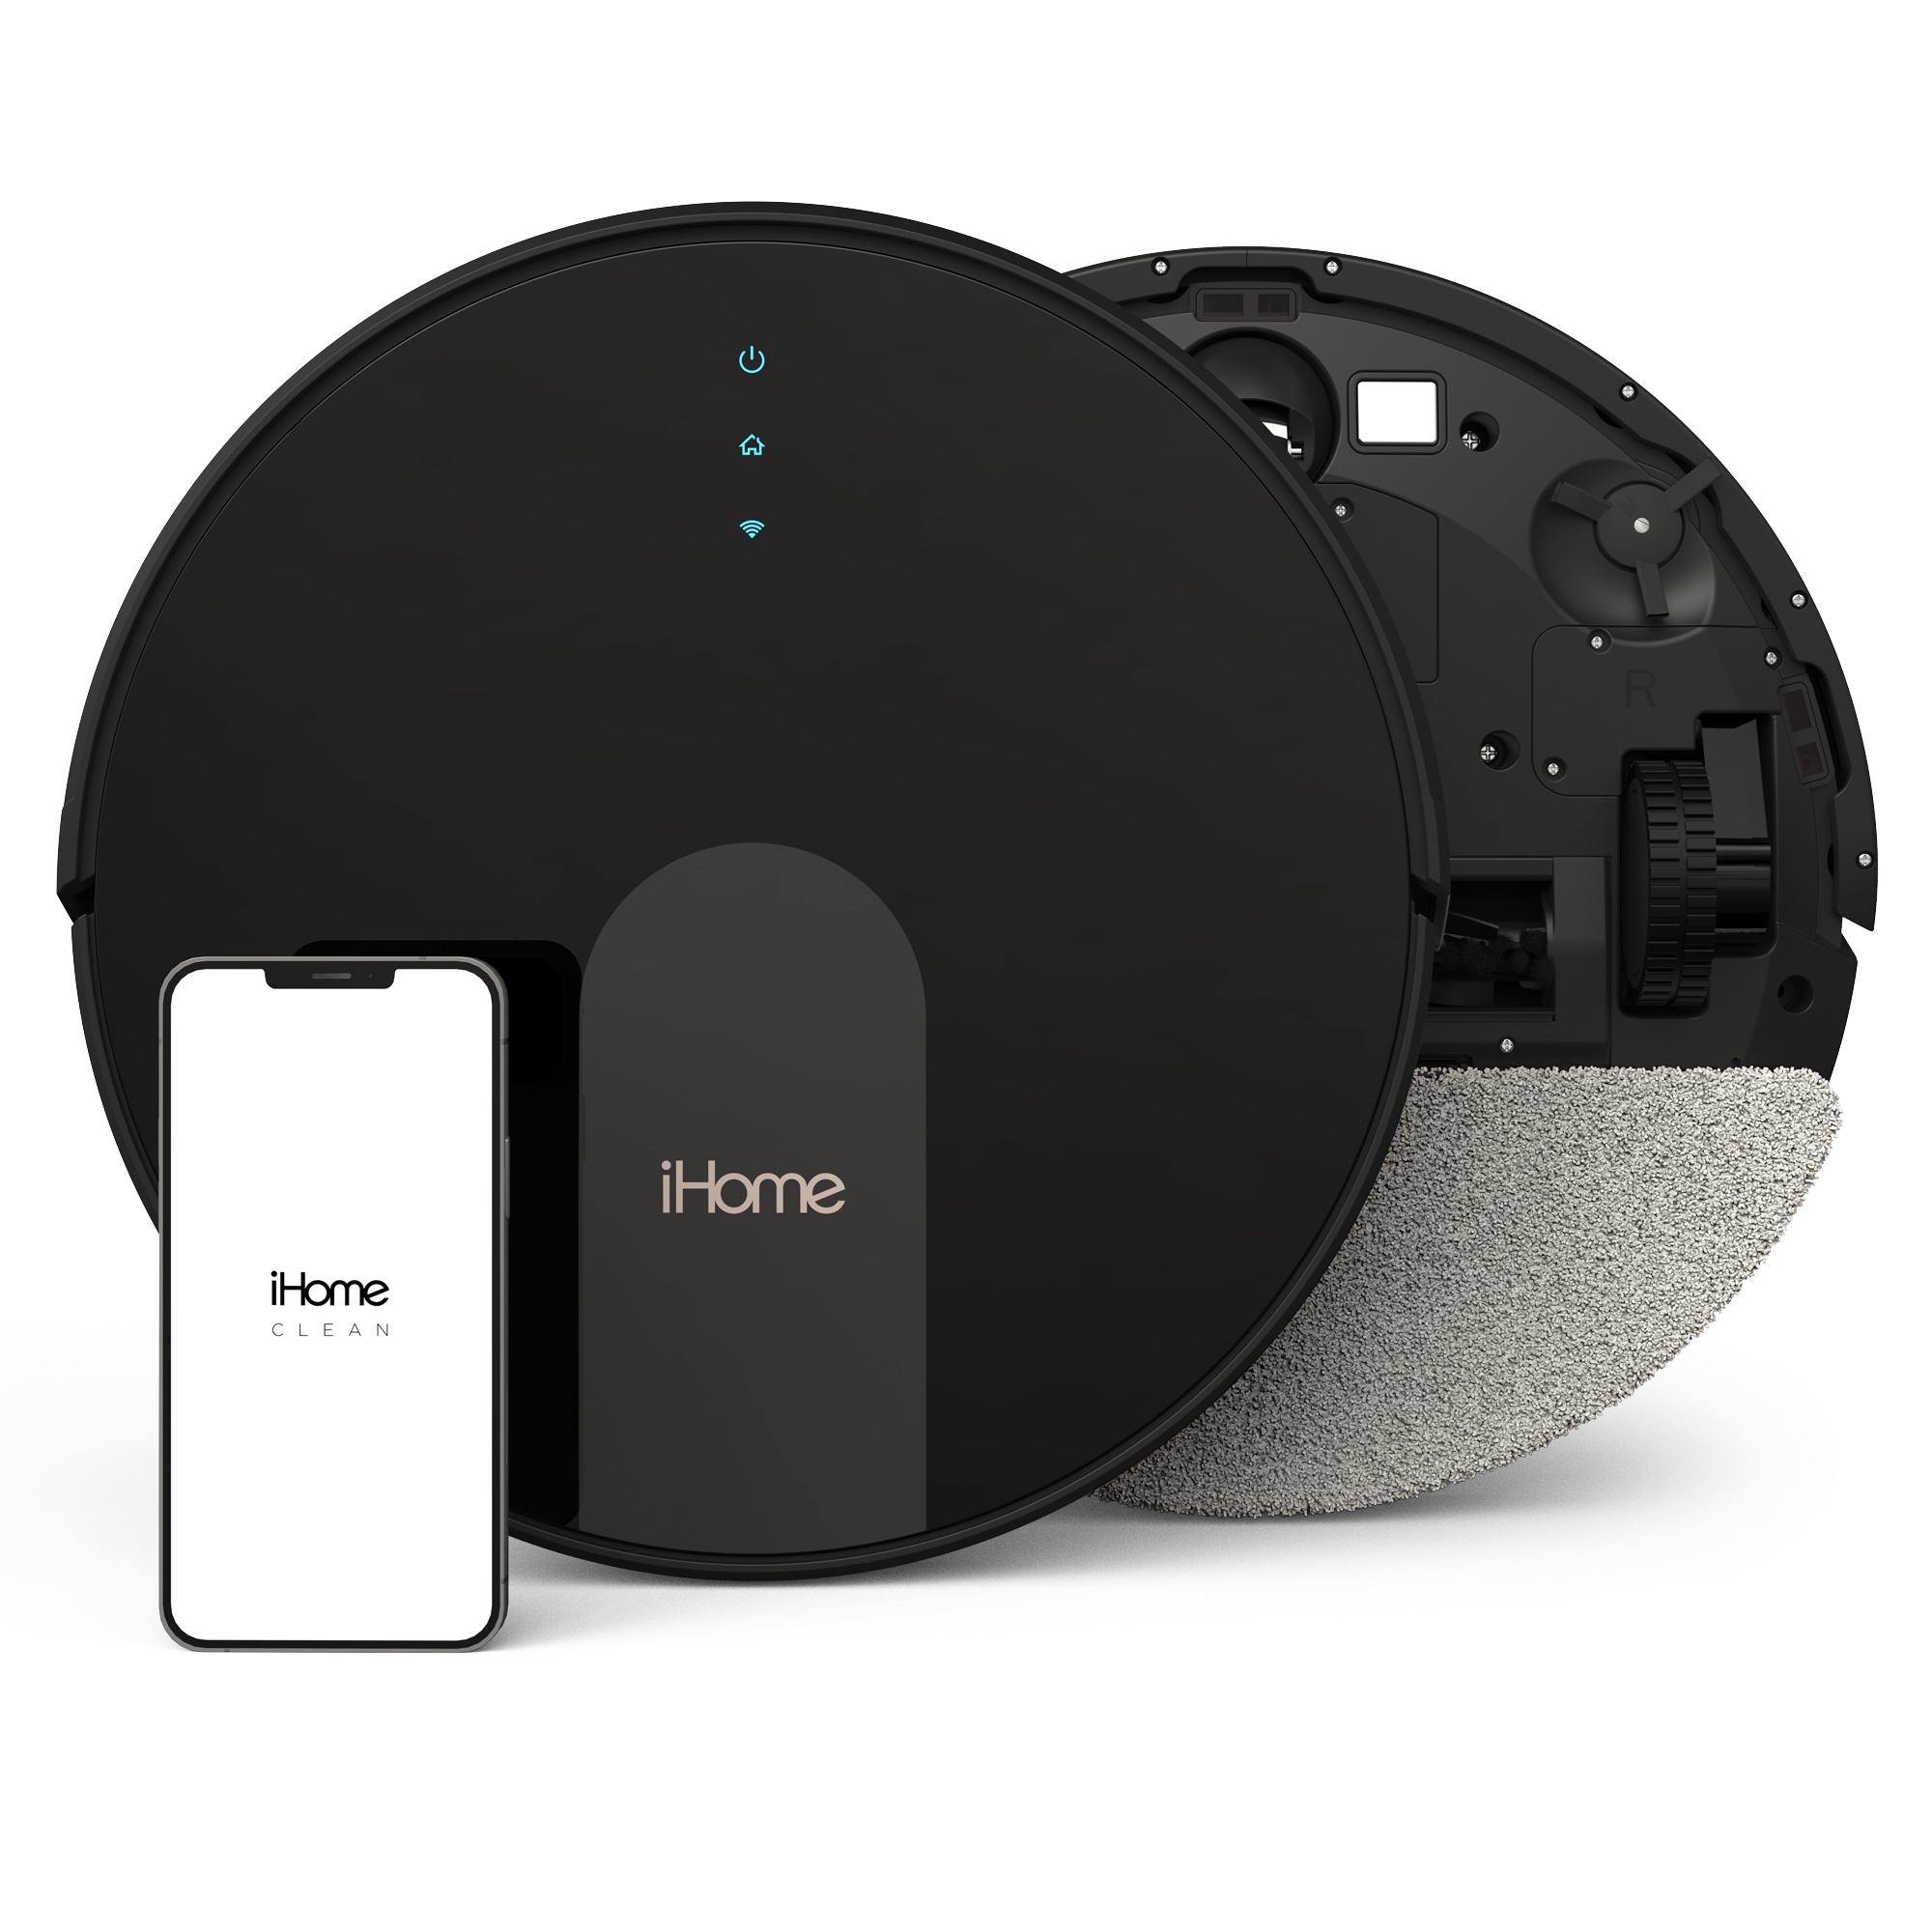 iHome AutoVac Eclipse G 2-in-1 Robot Vacuum and Mop $129